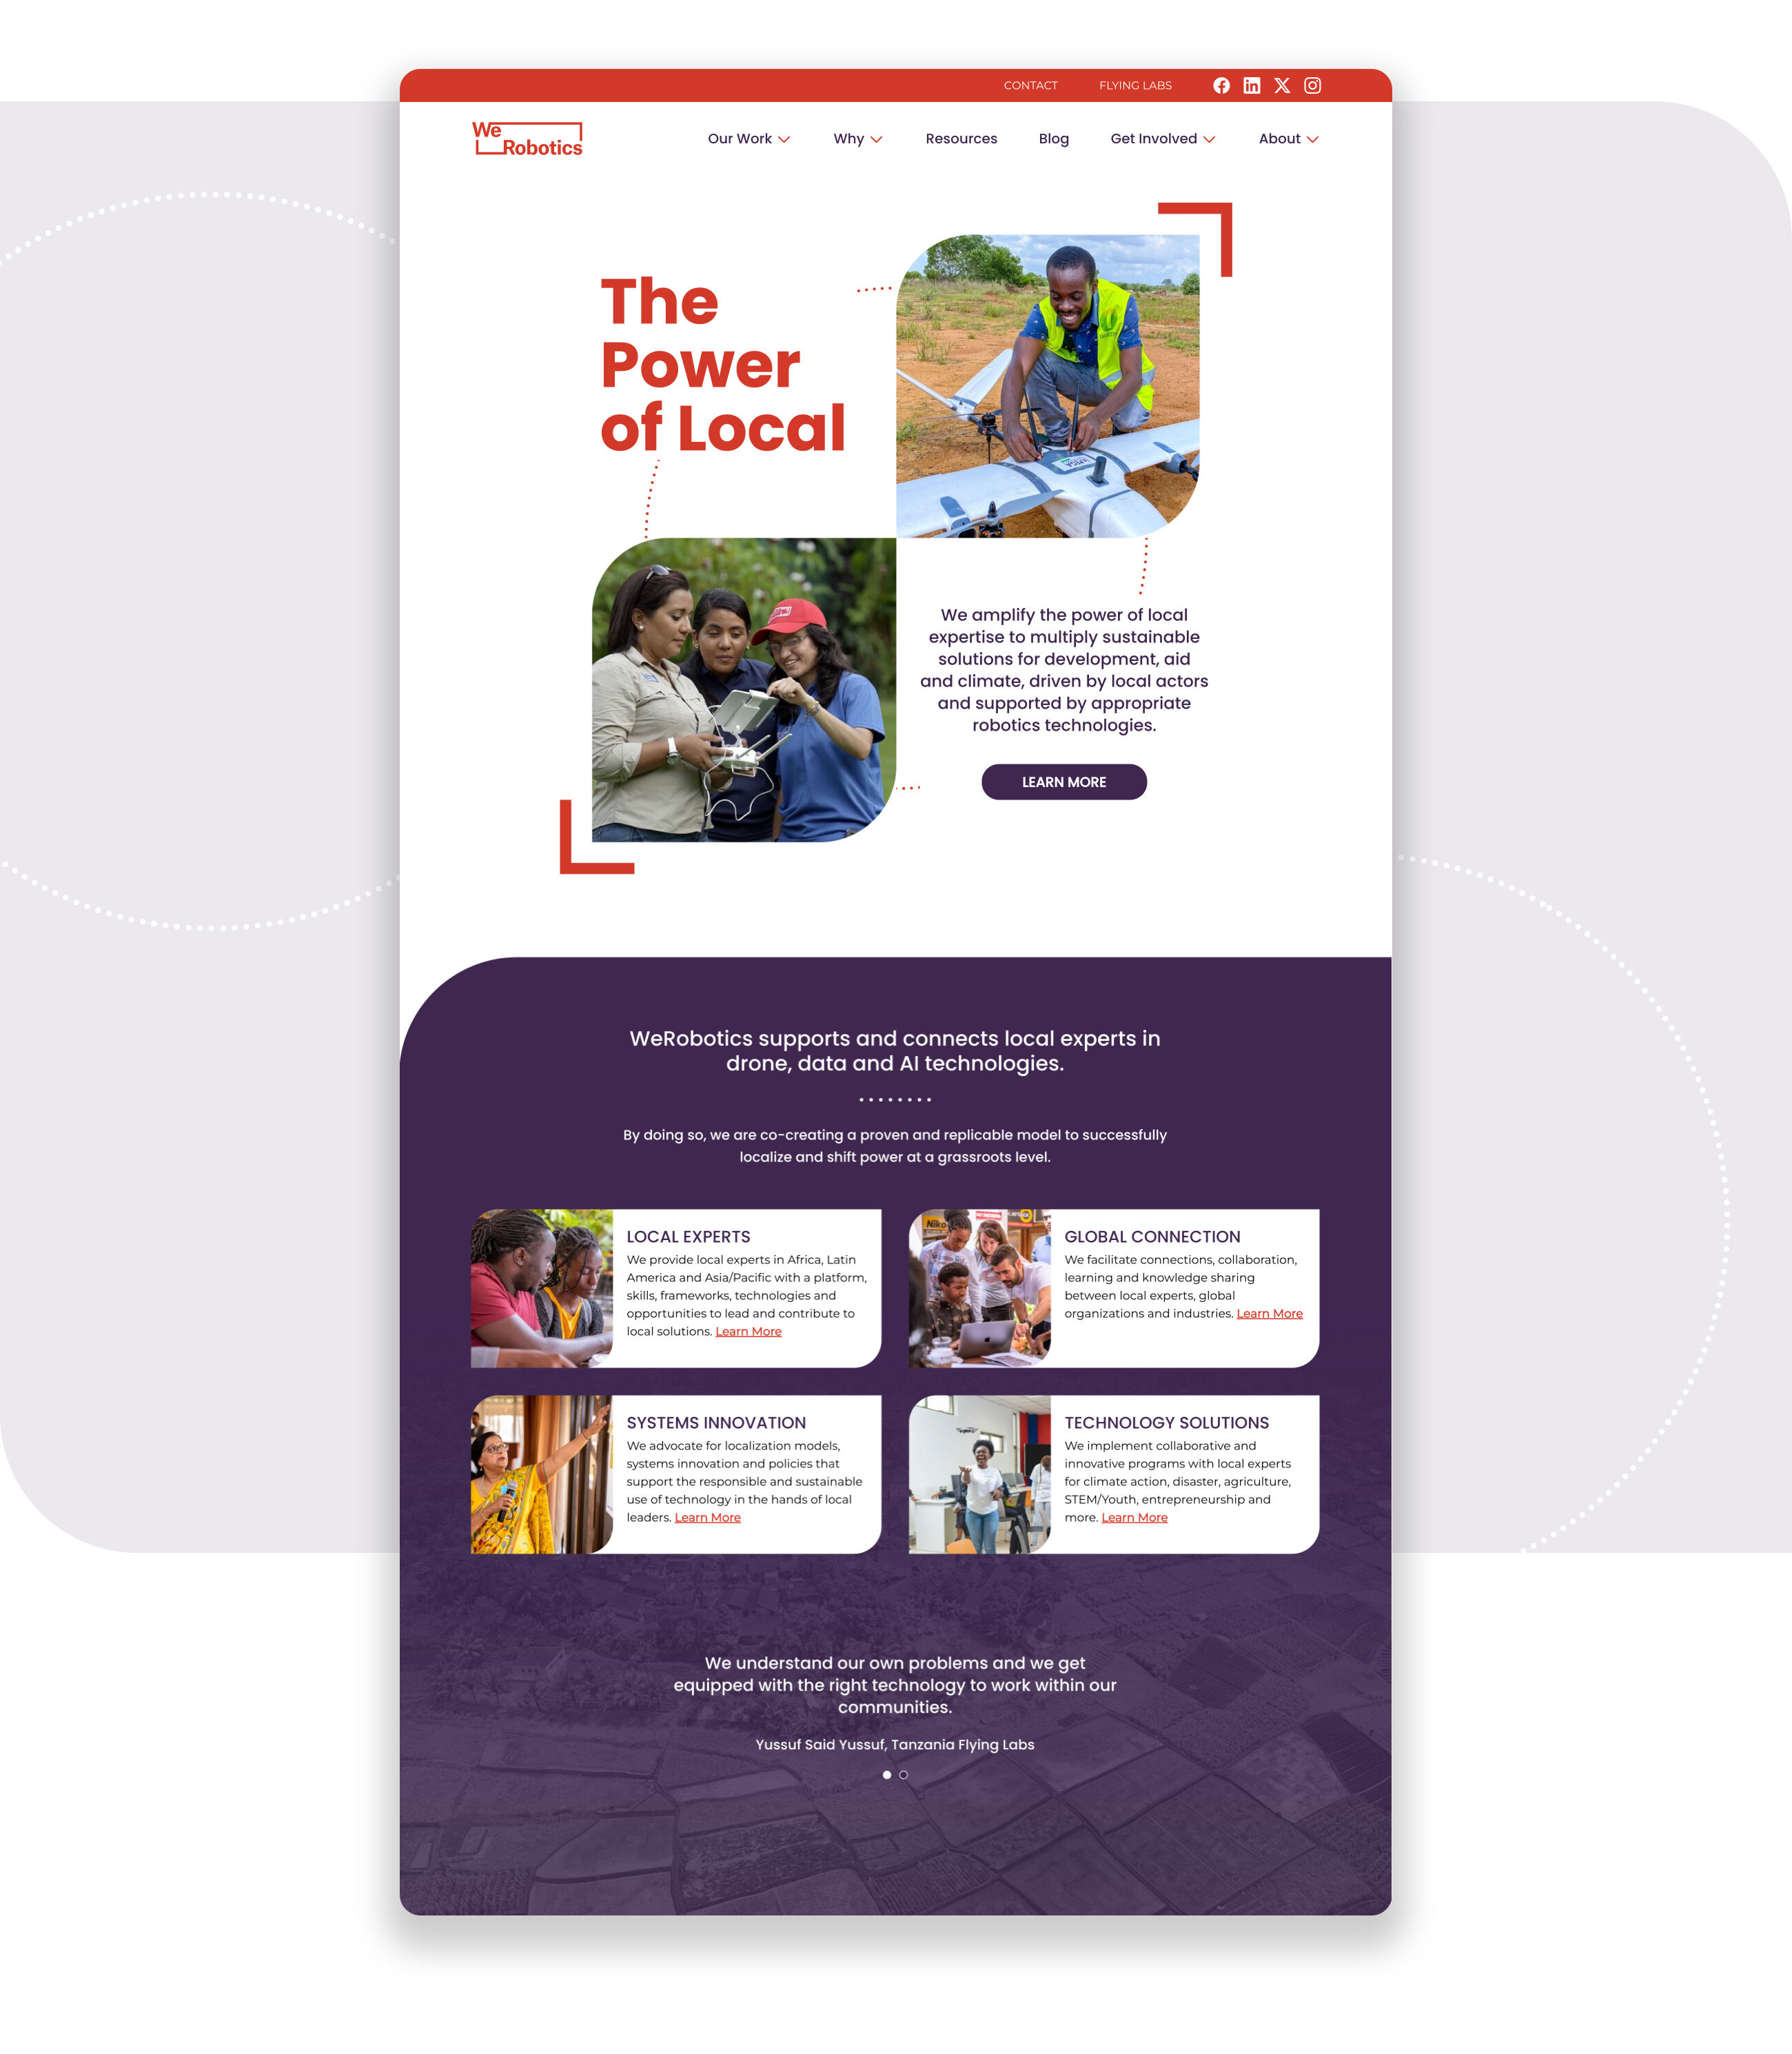 WeRobotics homepage with the hero headline "The Power of Local" and two images showing people working drone technology. This is followed by a section highlighting their three main areas of work - "Local Experts", "Systems Innovation", "Global Connection", and "Technology Solutions".